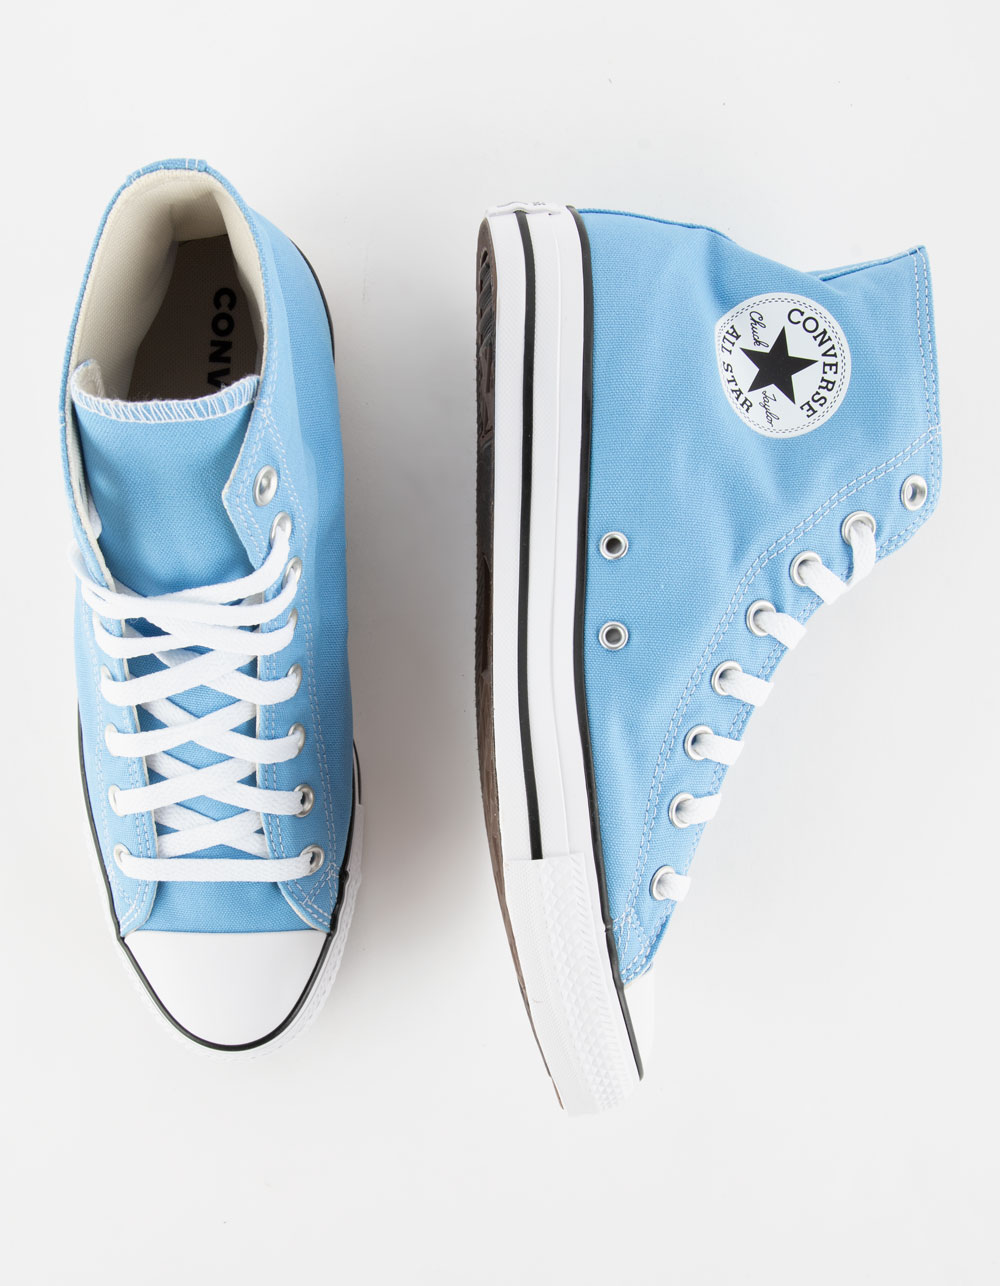 CONVERSE Chuck Taylor All Star High Top Shoes - LT BLUE/WHITE | Tillys